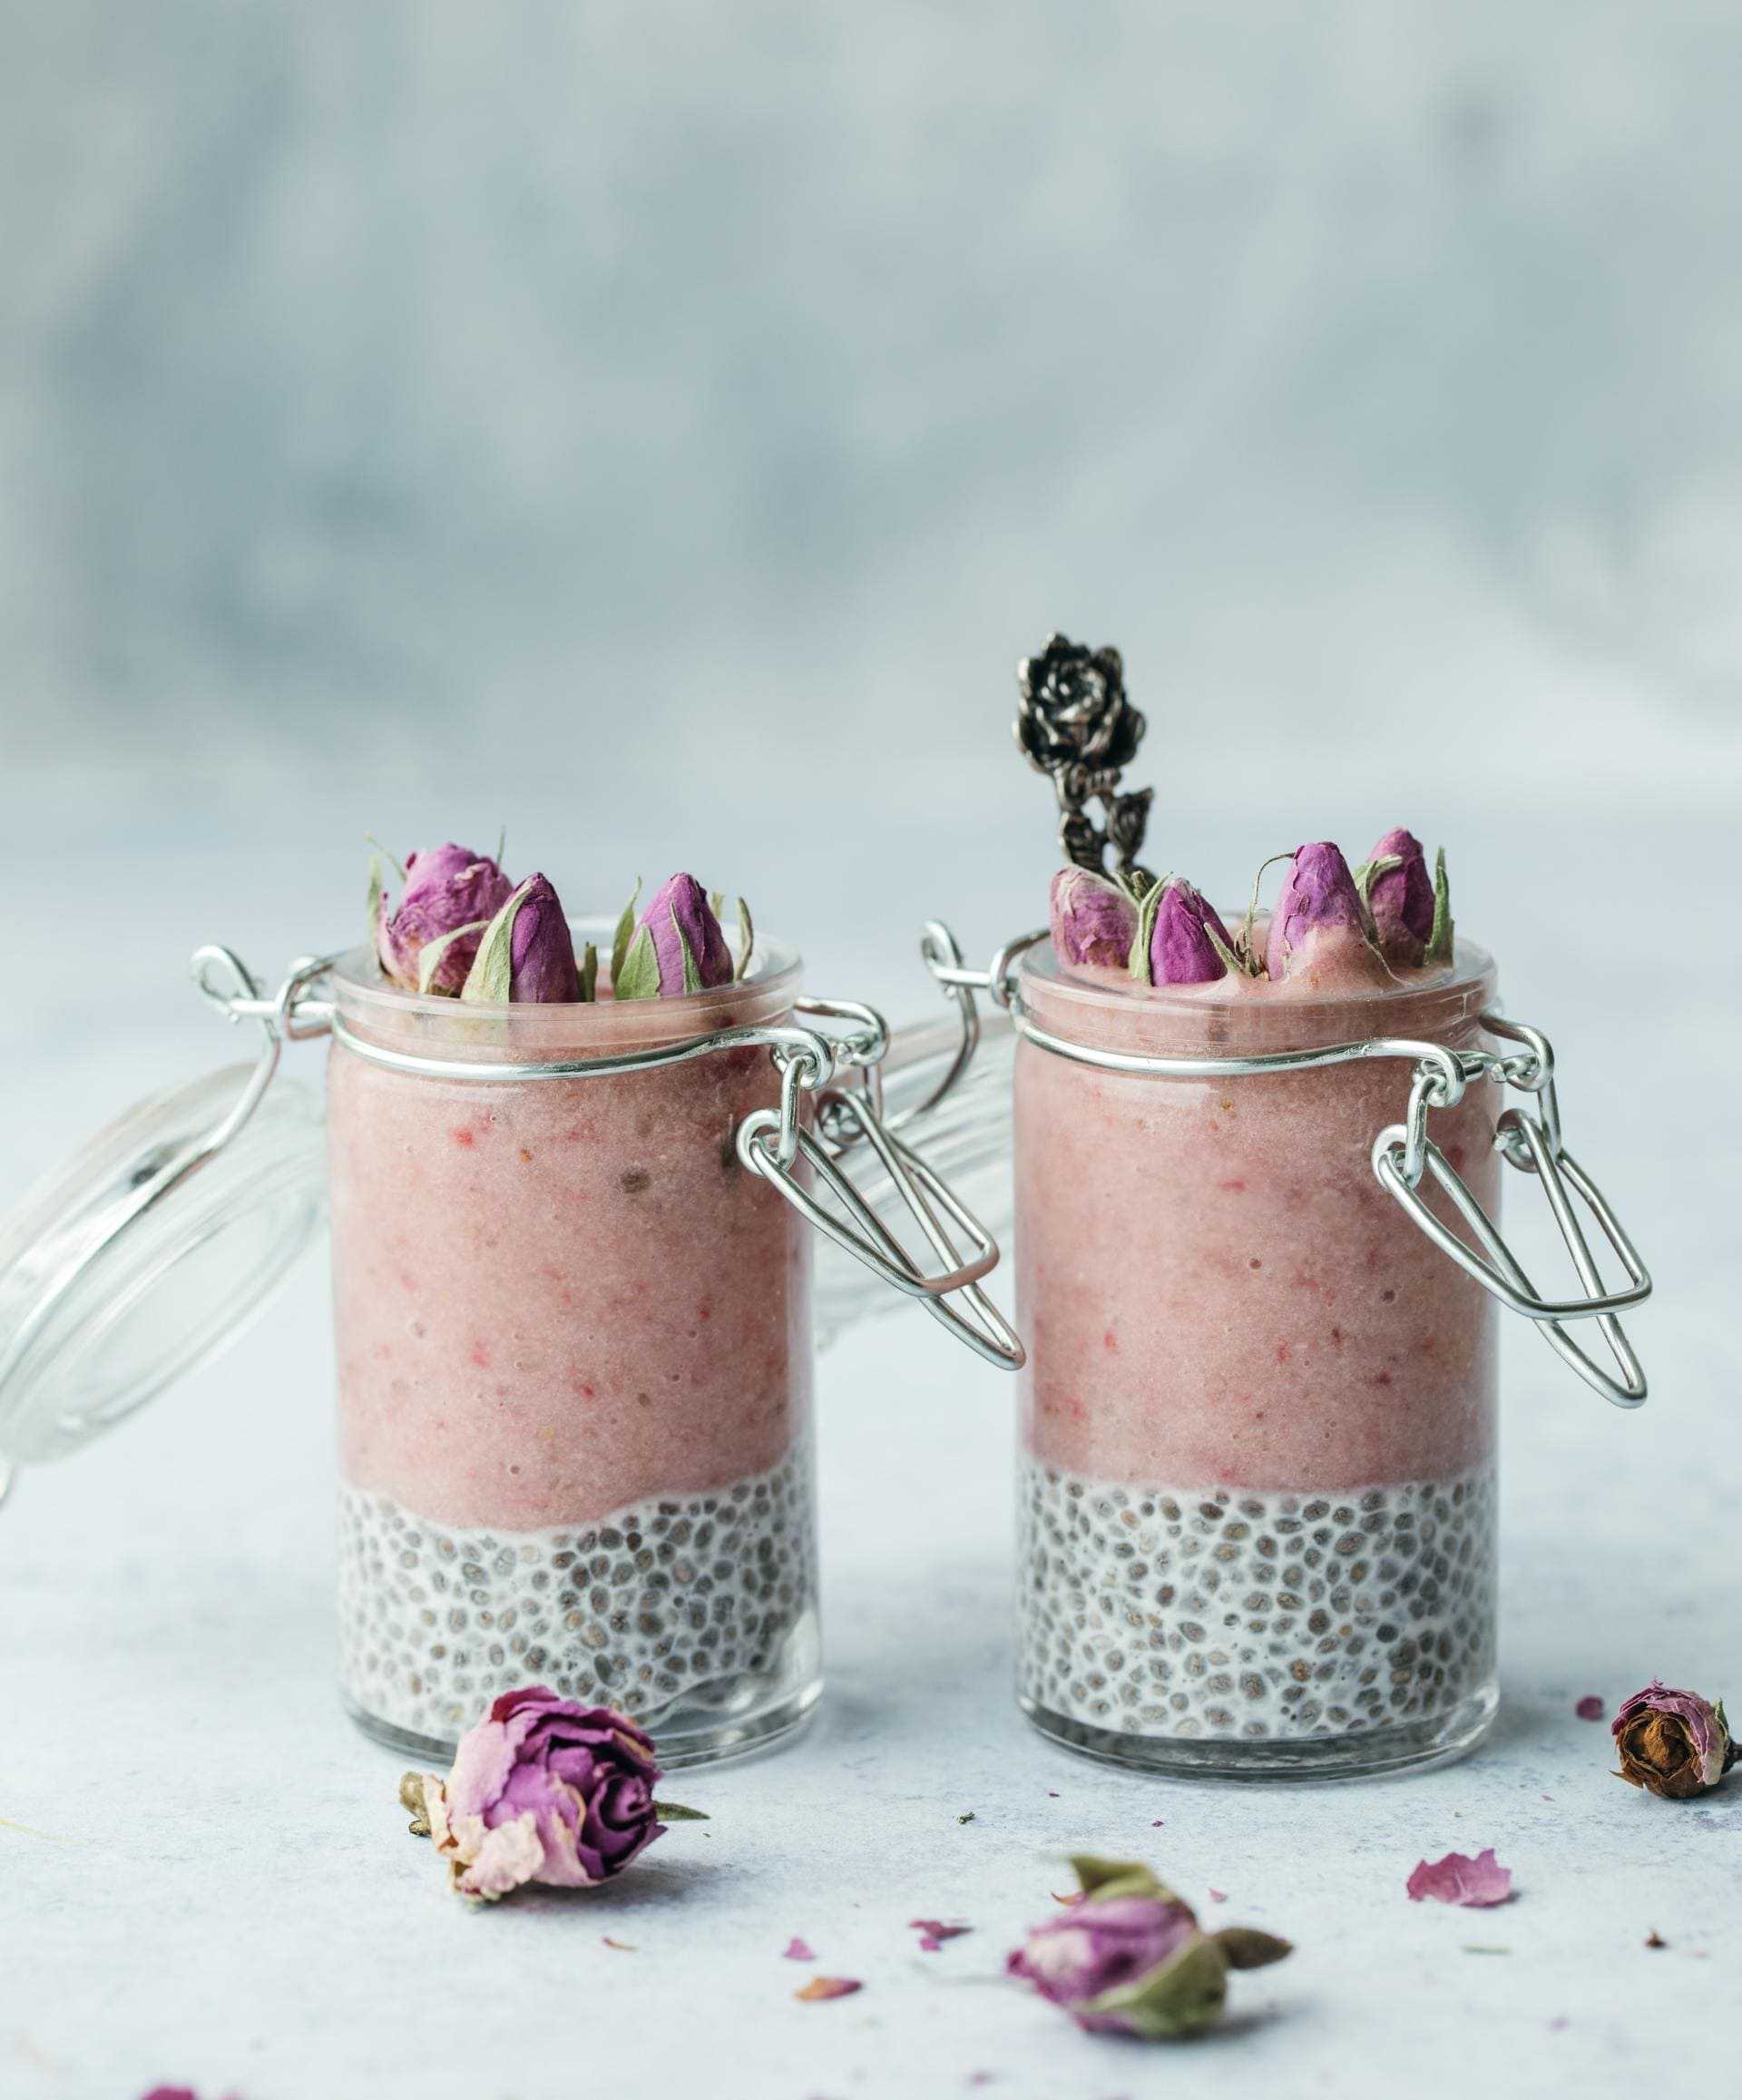 Chia Pudding With Strawberry Topping